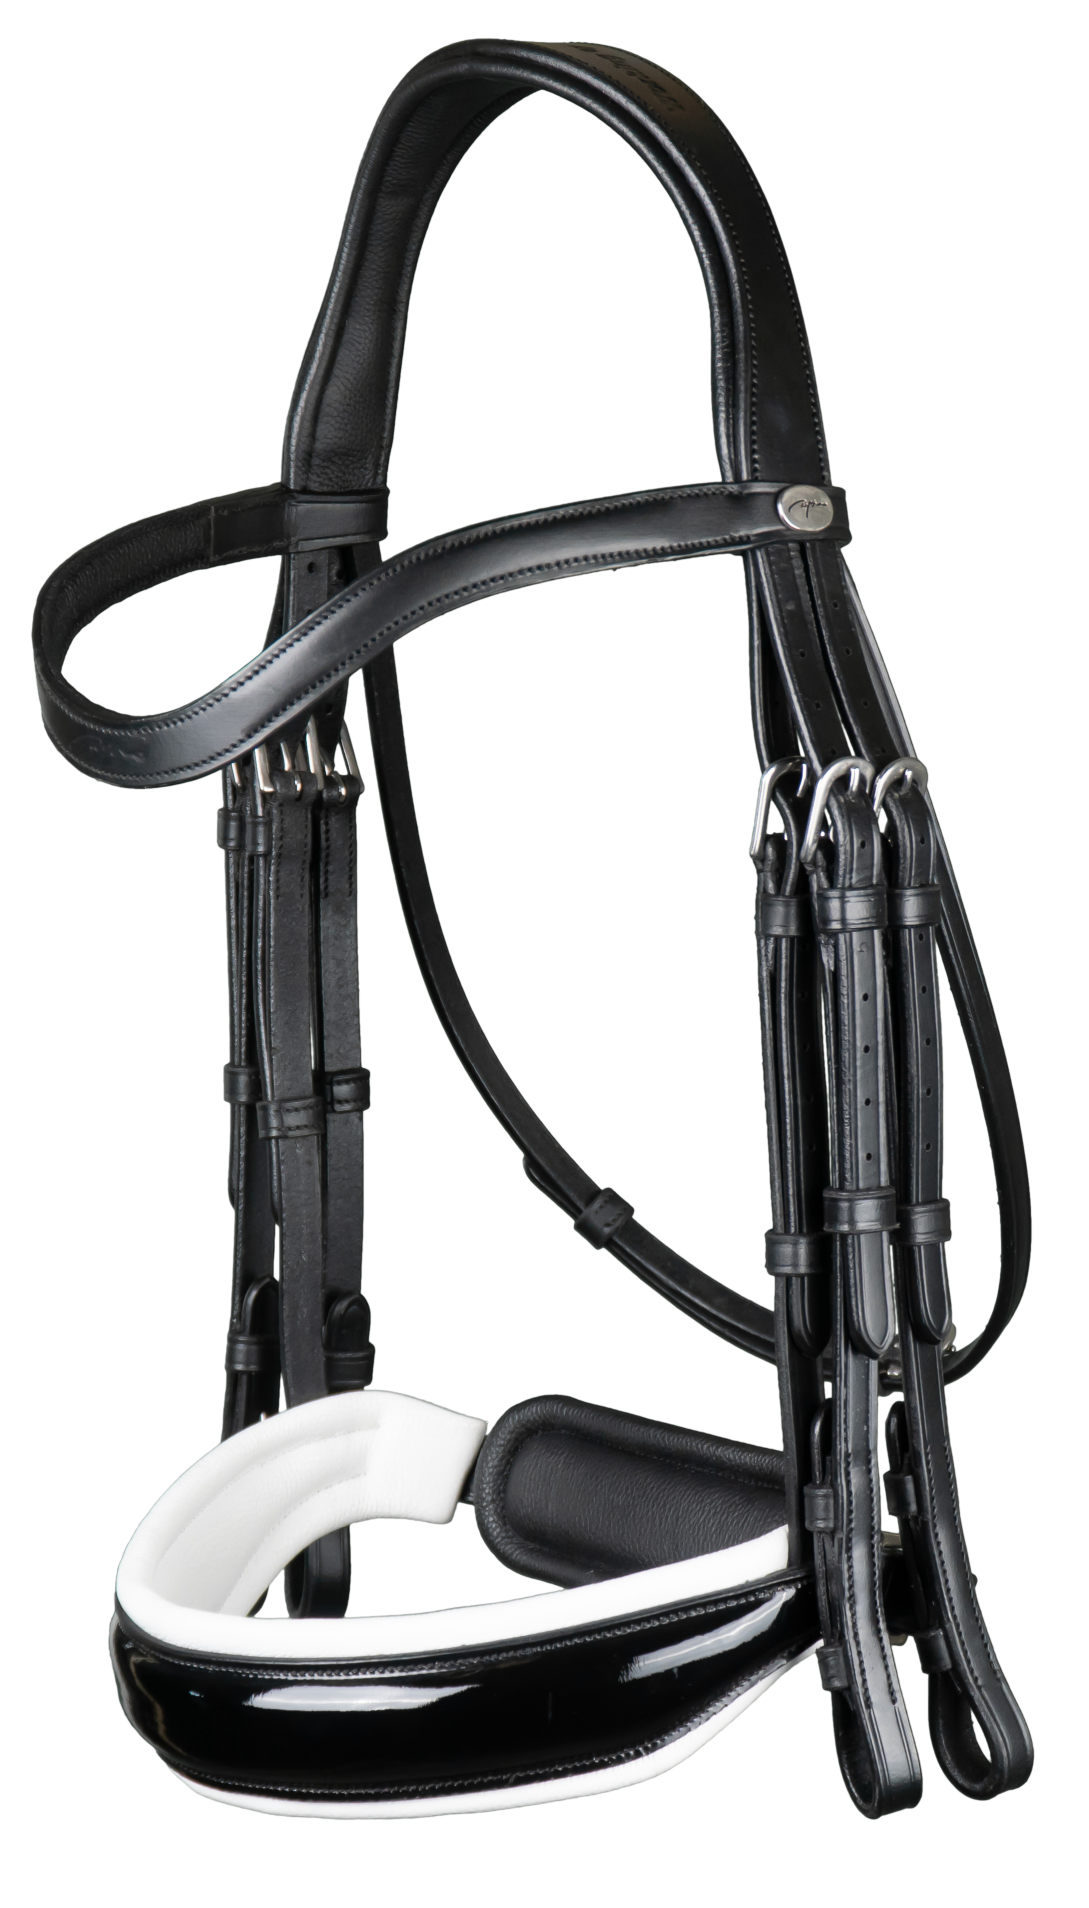 Double bridle with white noseband